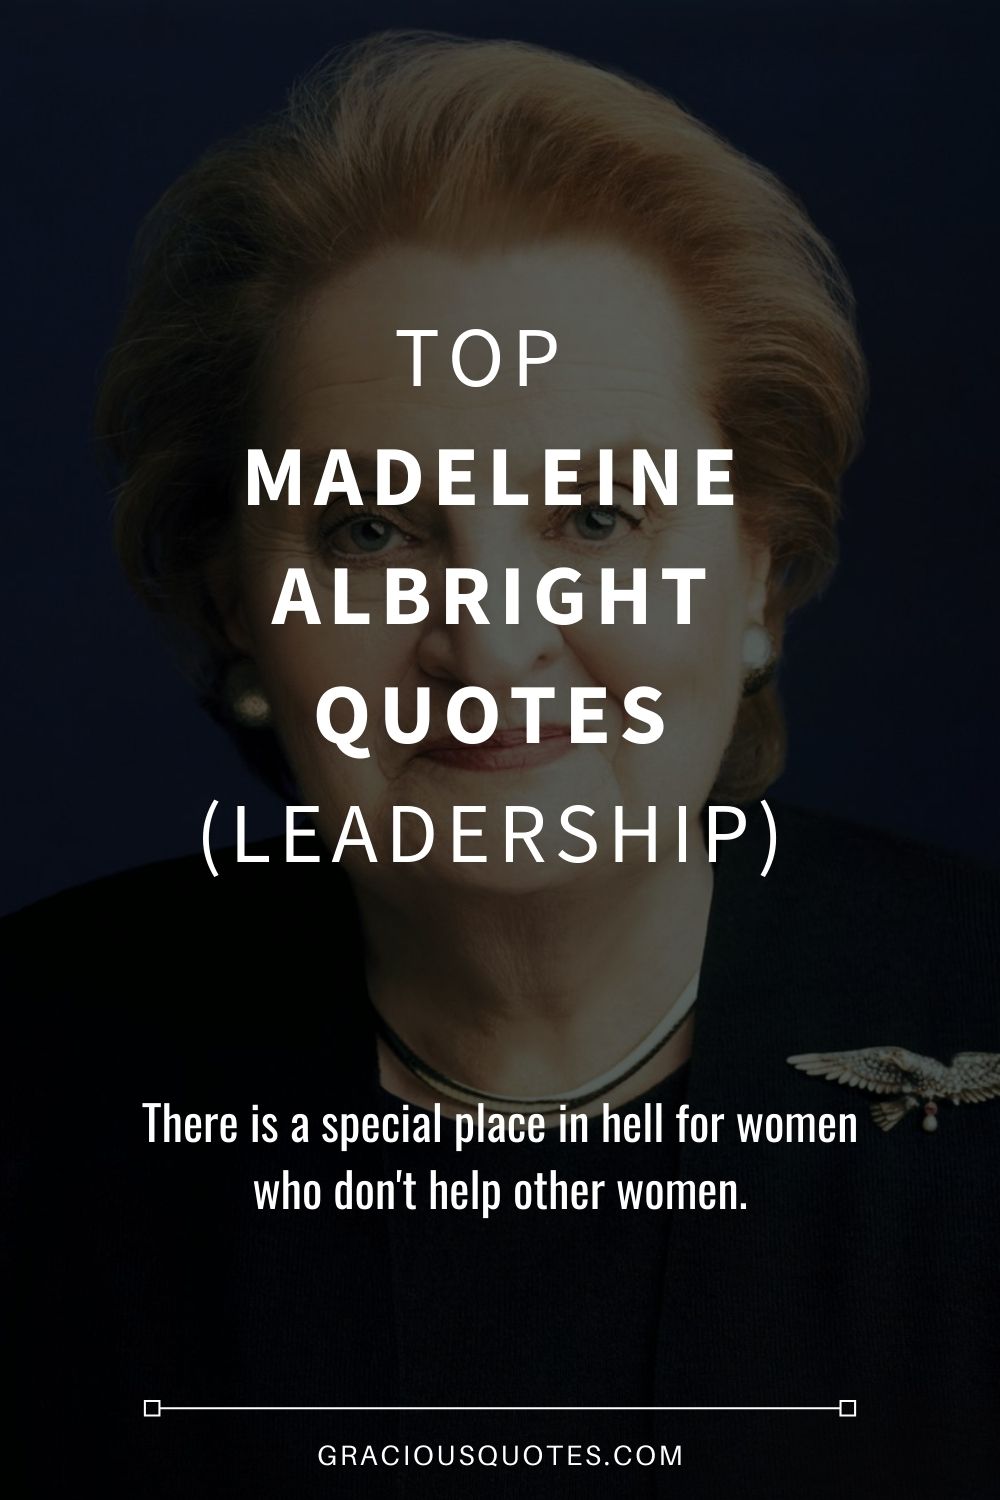 Top Madeleine Albright Quotes (LEADERSHIP) - GRACIOUS QUOTES